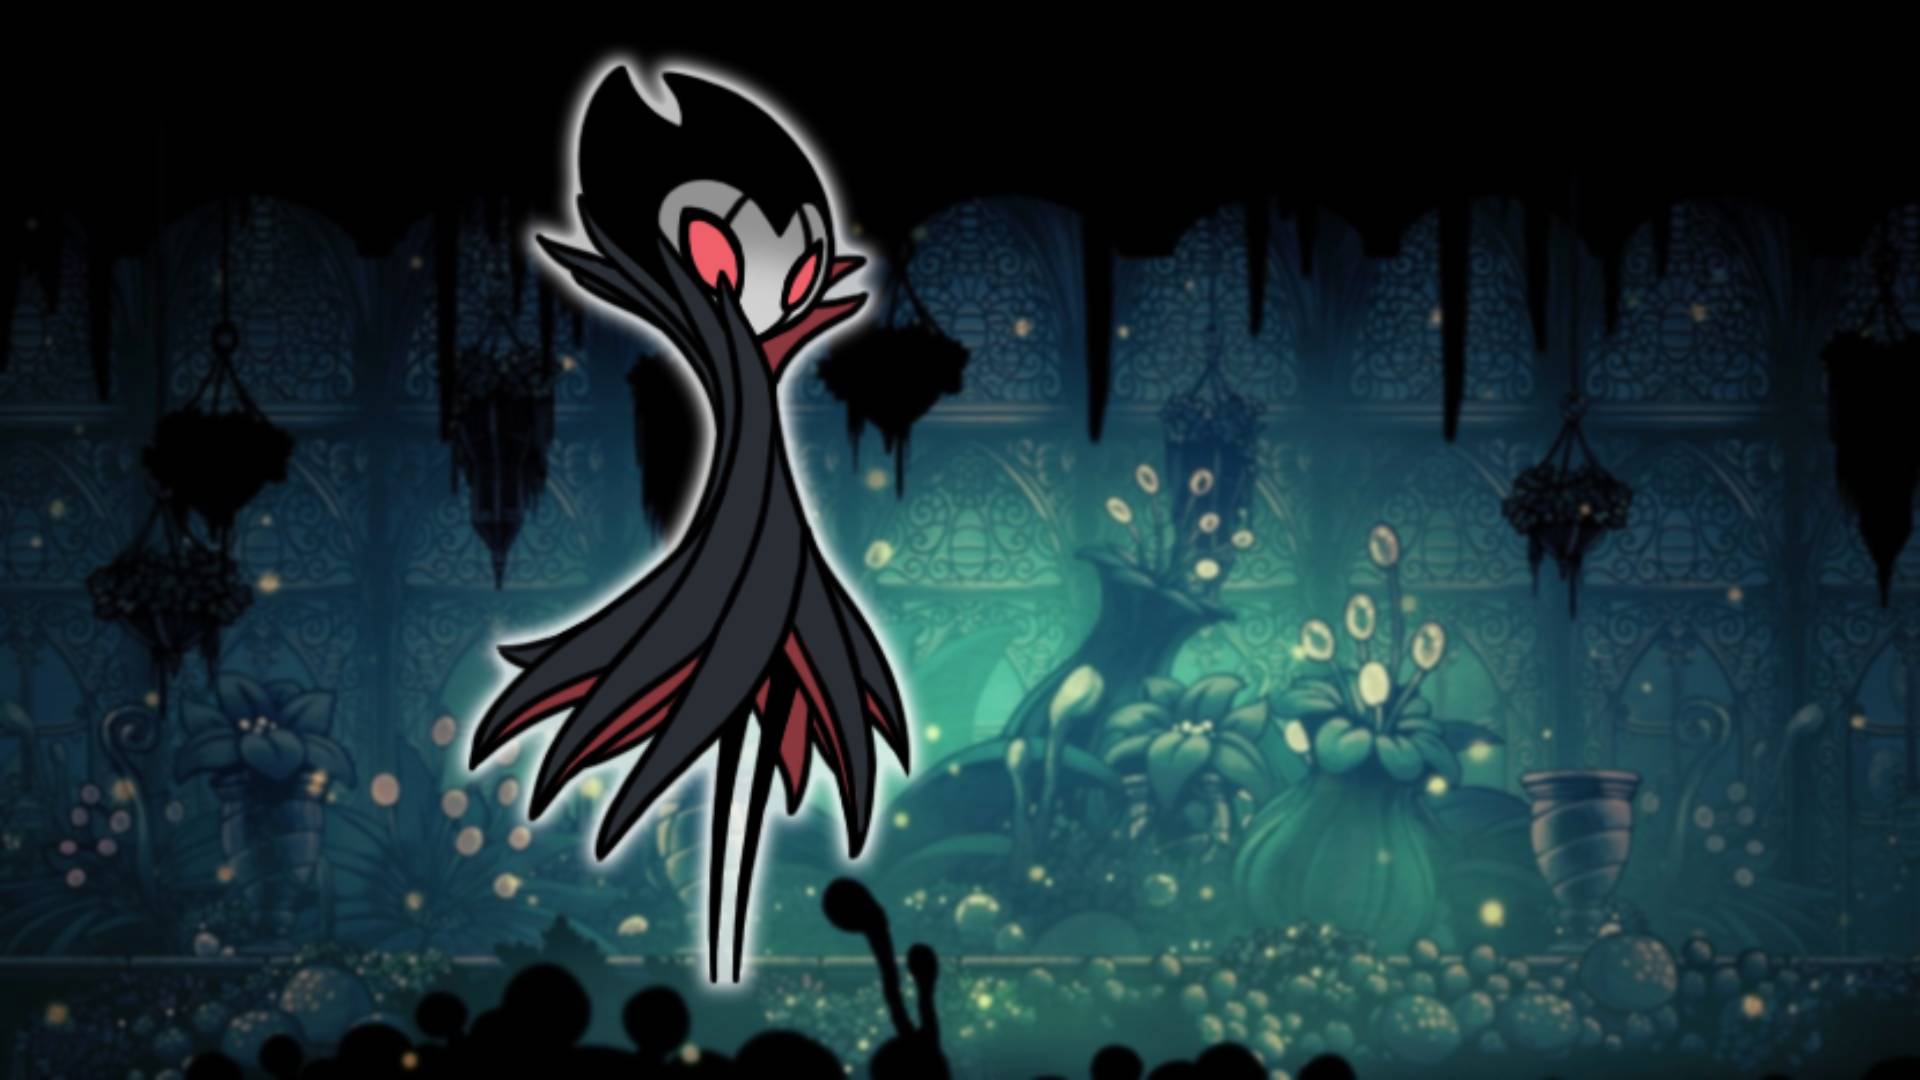 Troupe Master Grimm - the Hollow Knight boss, is visible against a mossy green background area from Hollow Knight 